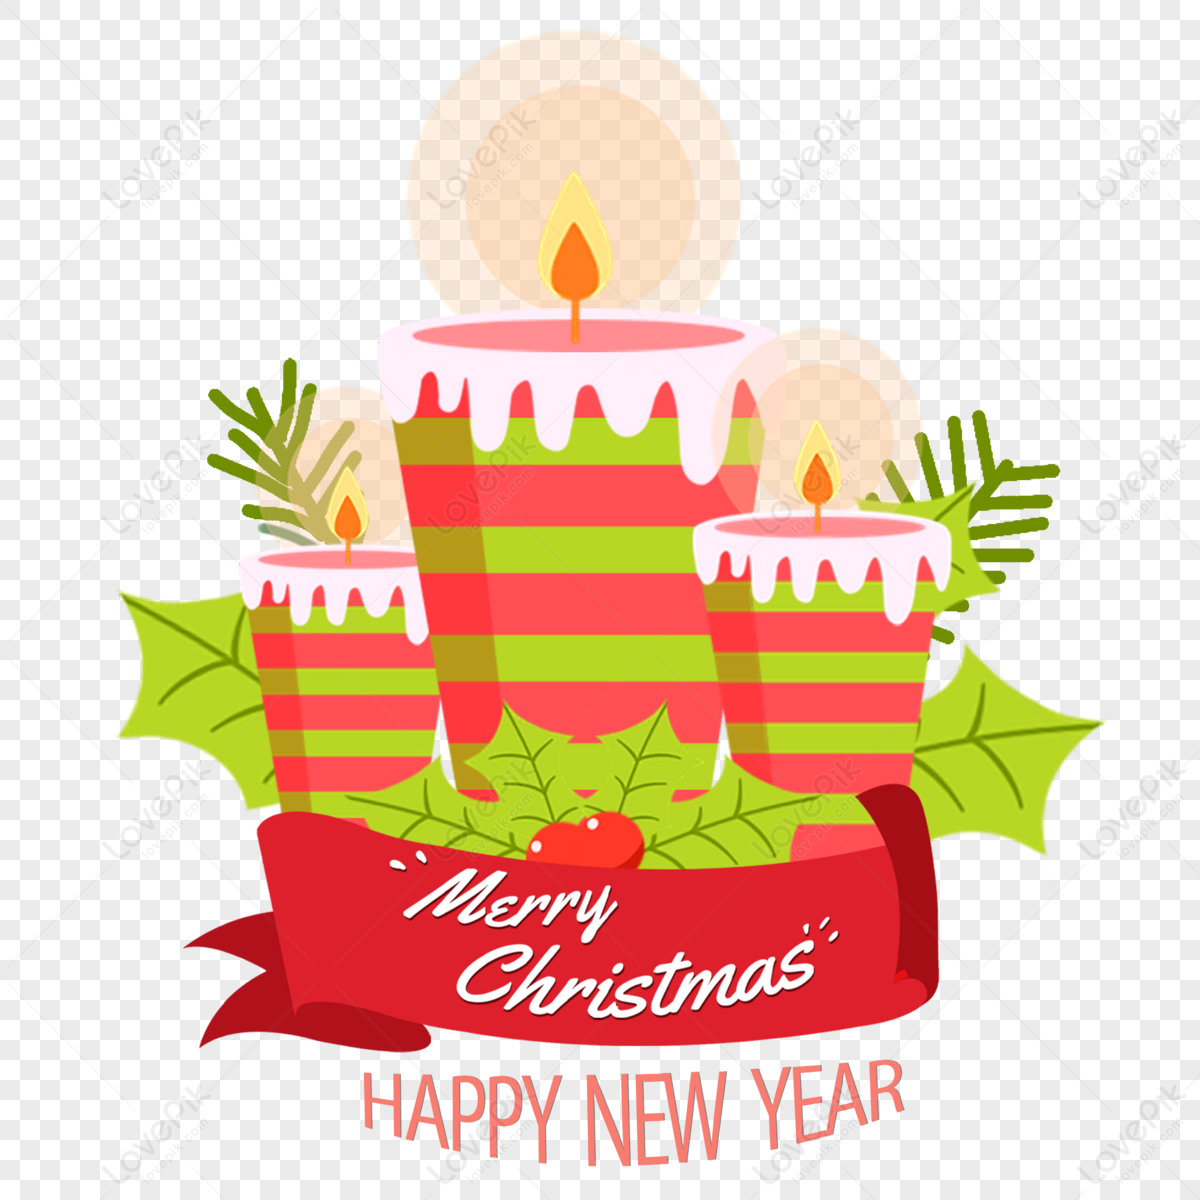 Christmas candle holy light line art Royalty Free Vector